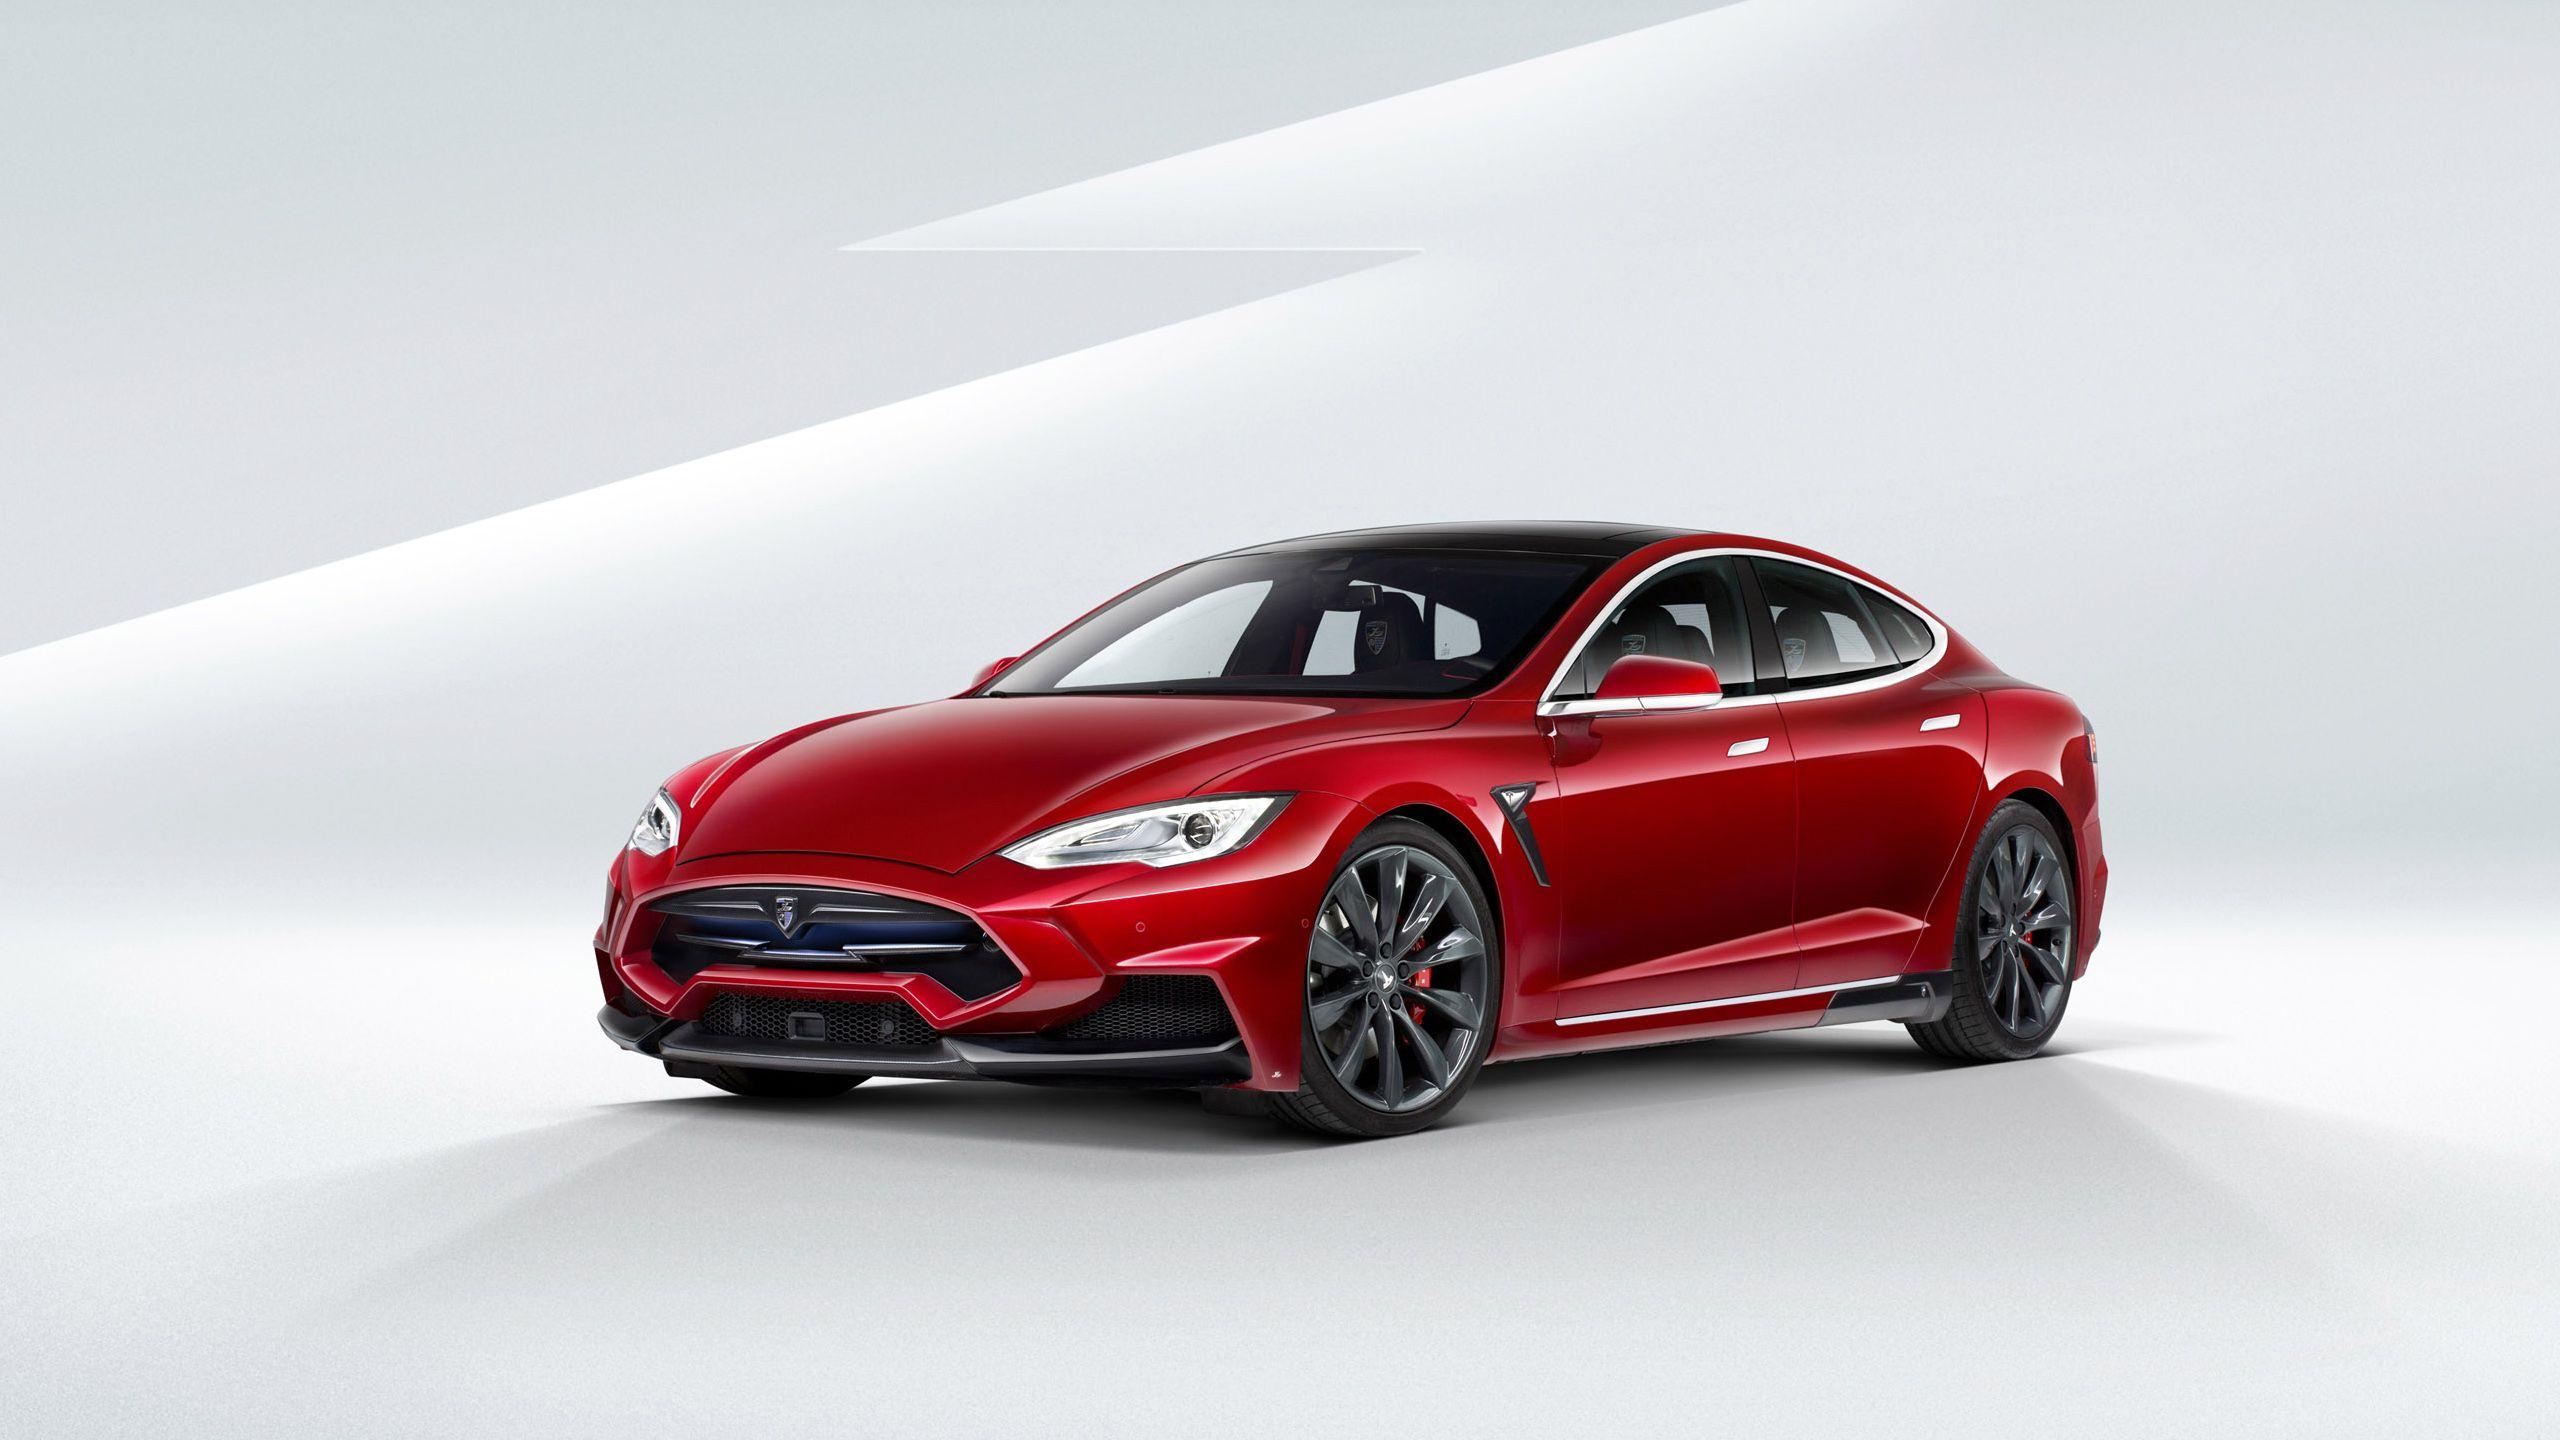 Red Tesla Model S Wallpapers Top Free Red Tesla Model S Backgrounds Wallpaperaccess